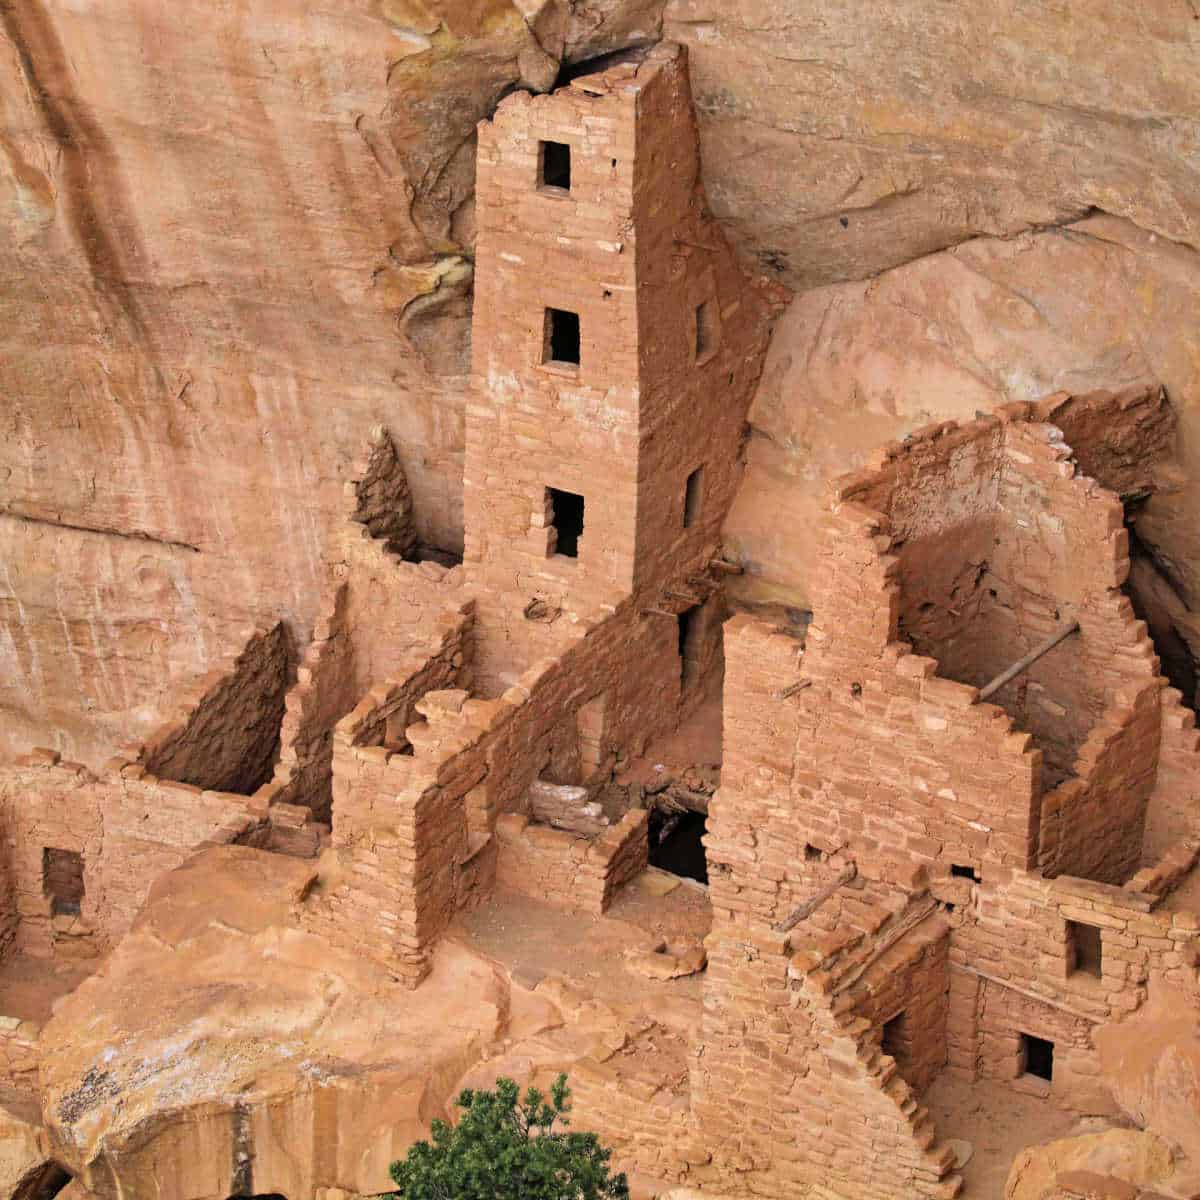 Photo of the Square Tower House in Mesa Verde National Park